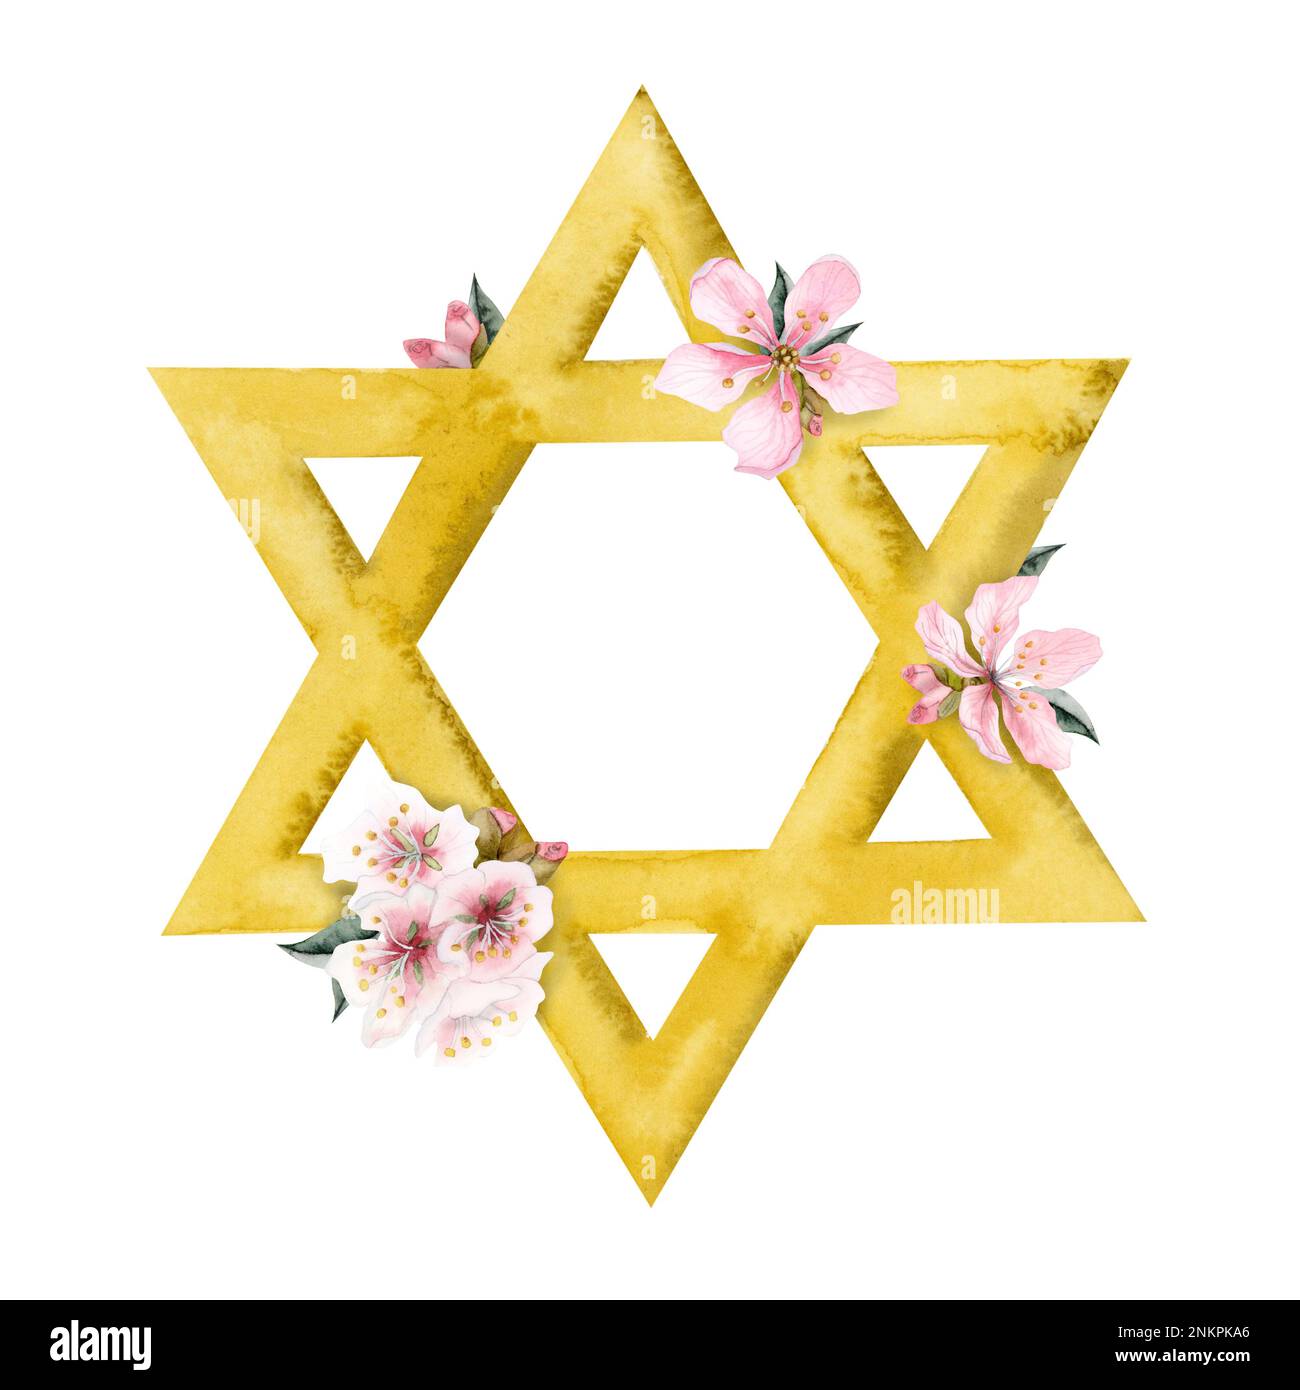 Watercolor Passover greeting card template with gold star of David and almond flowers illustration isolated on white background Stock Photo